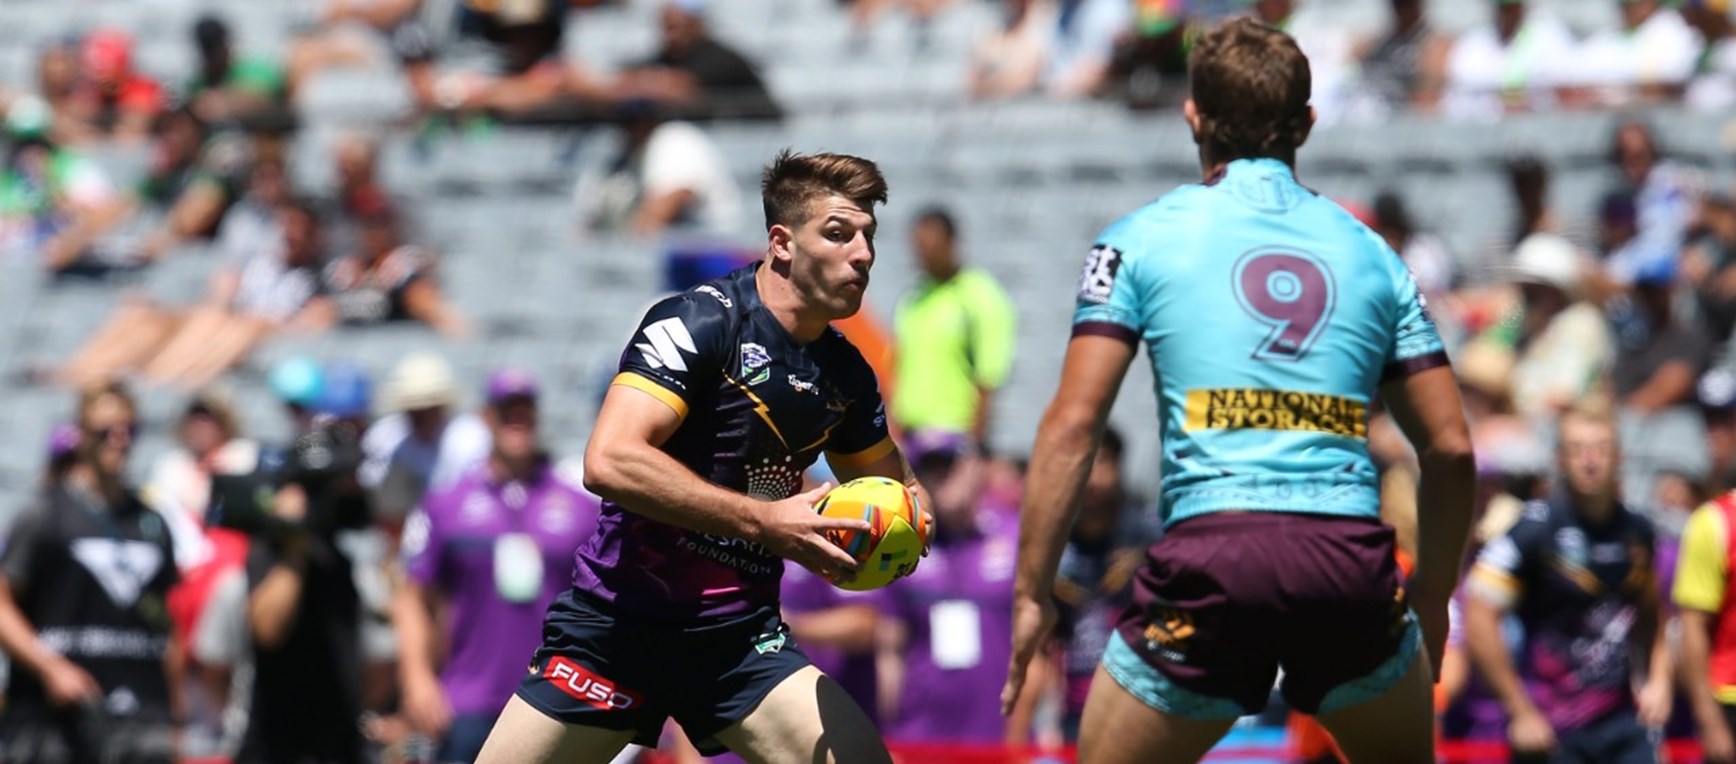 In pictures: Storm v Broncos